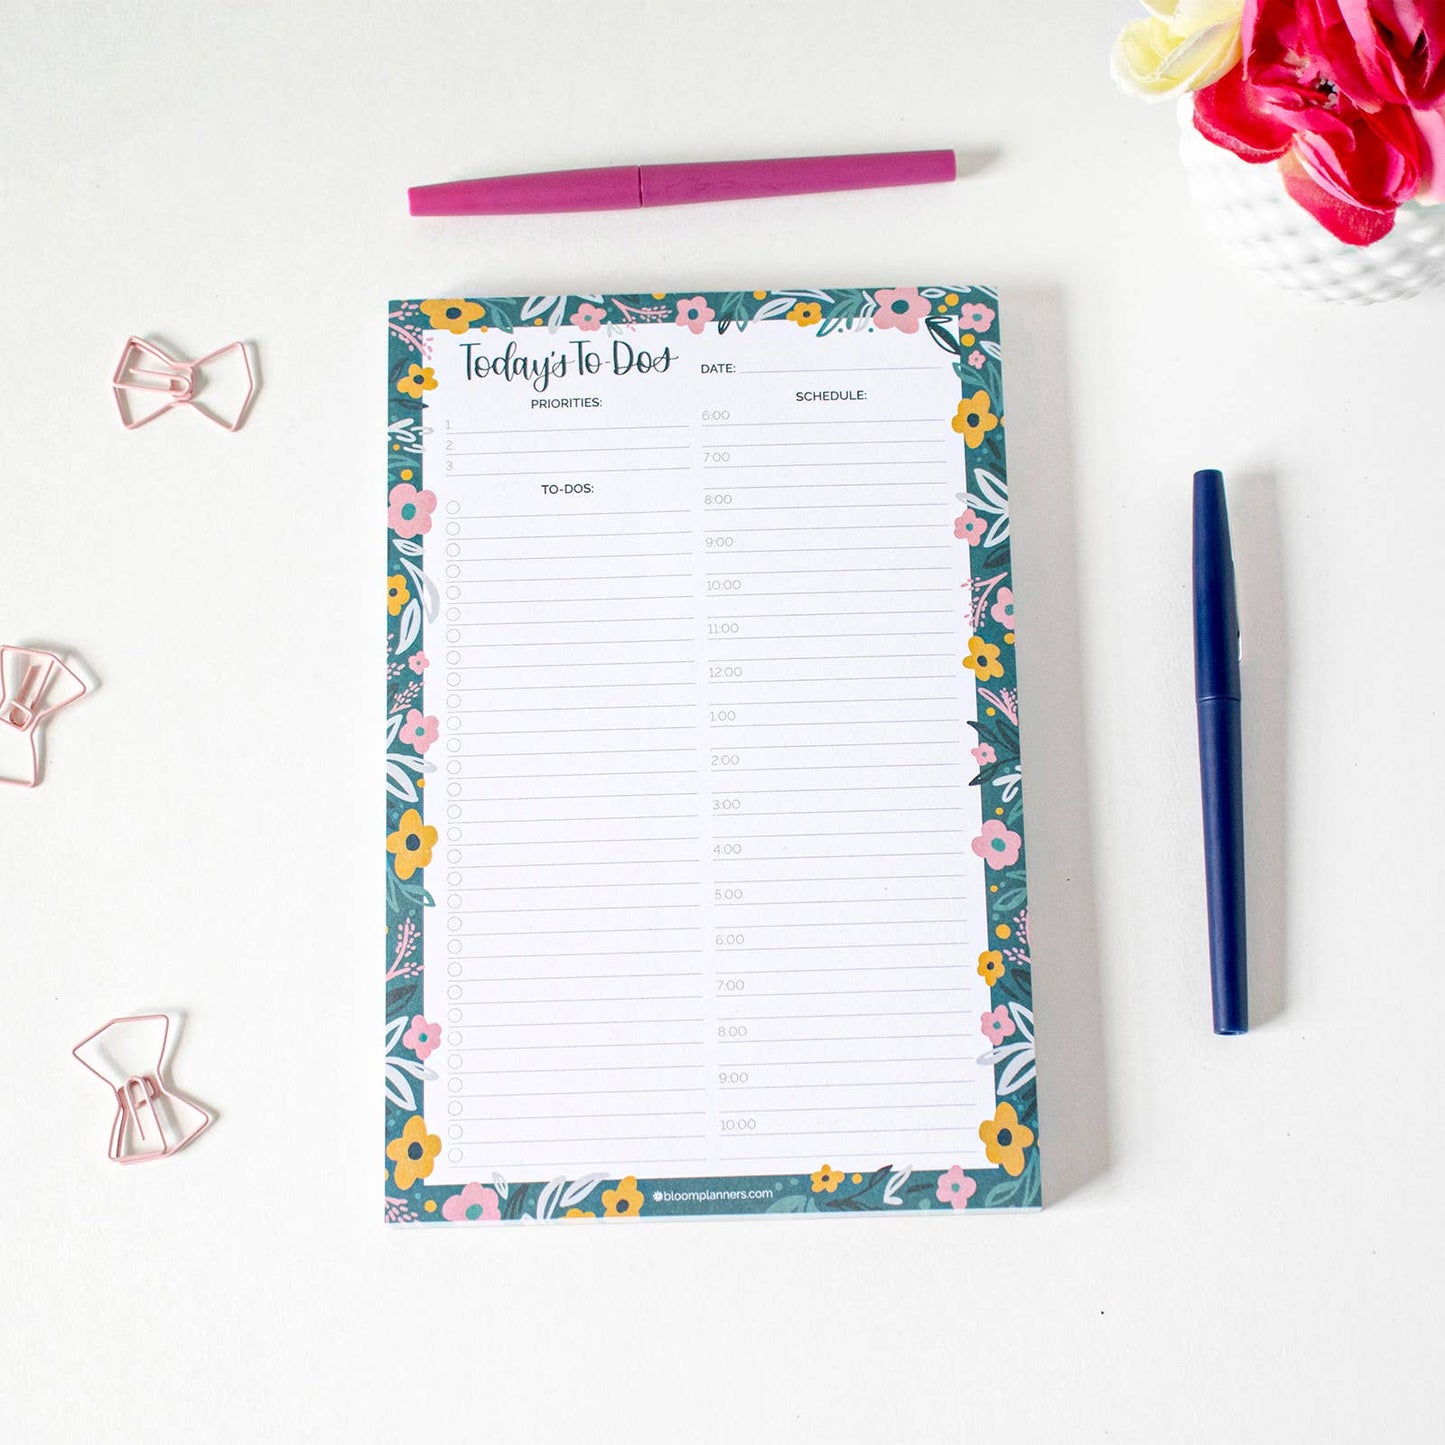 6x9 Timed Daily Planning Pad, Choose Design: Garden Blooms Core bloom daily planners